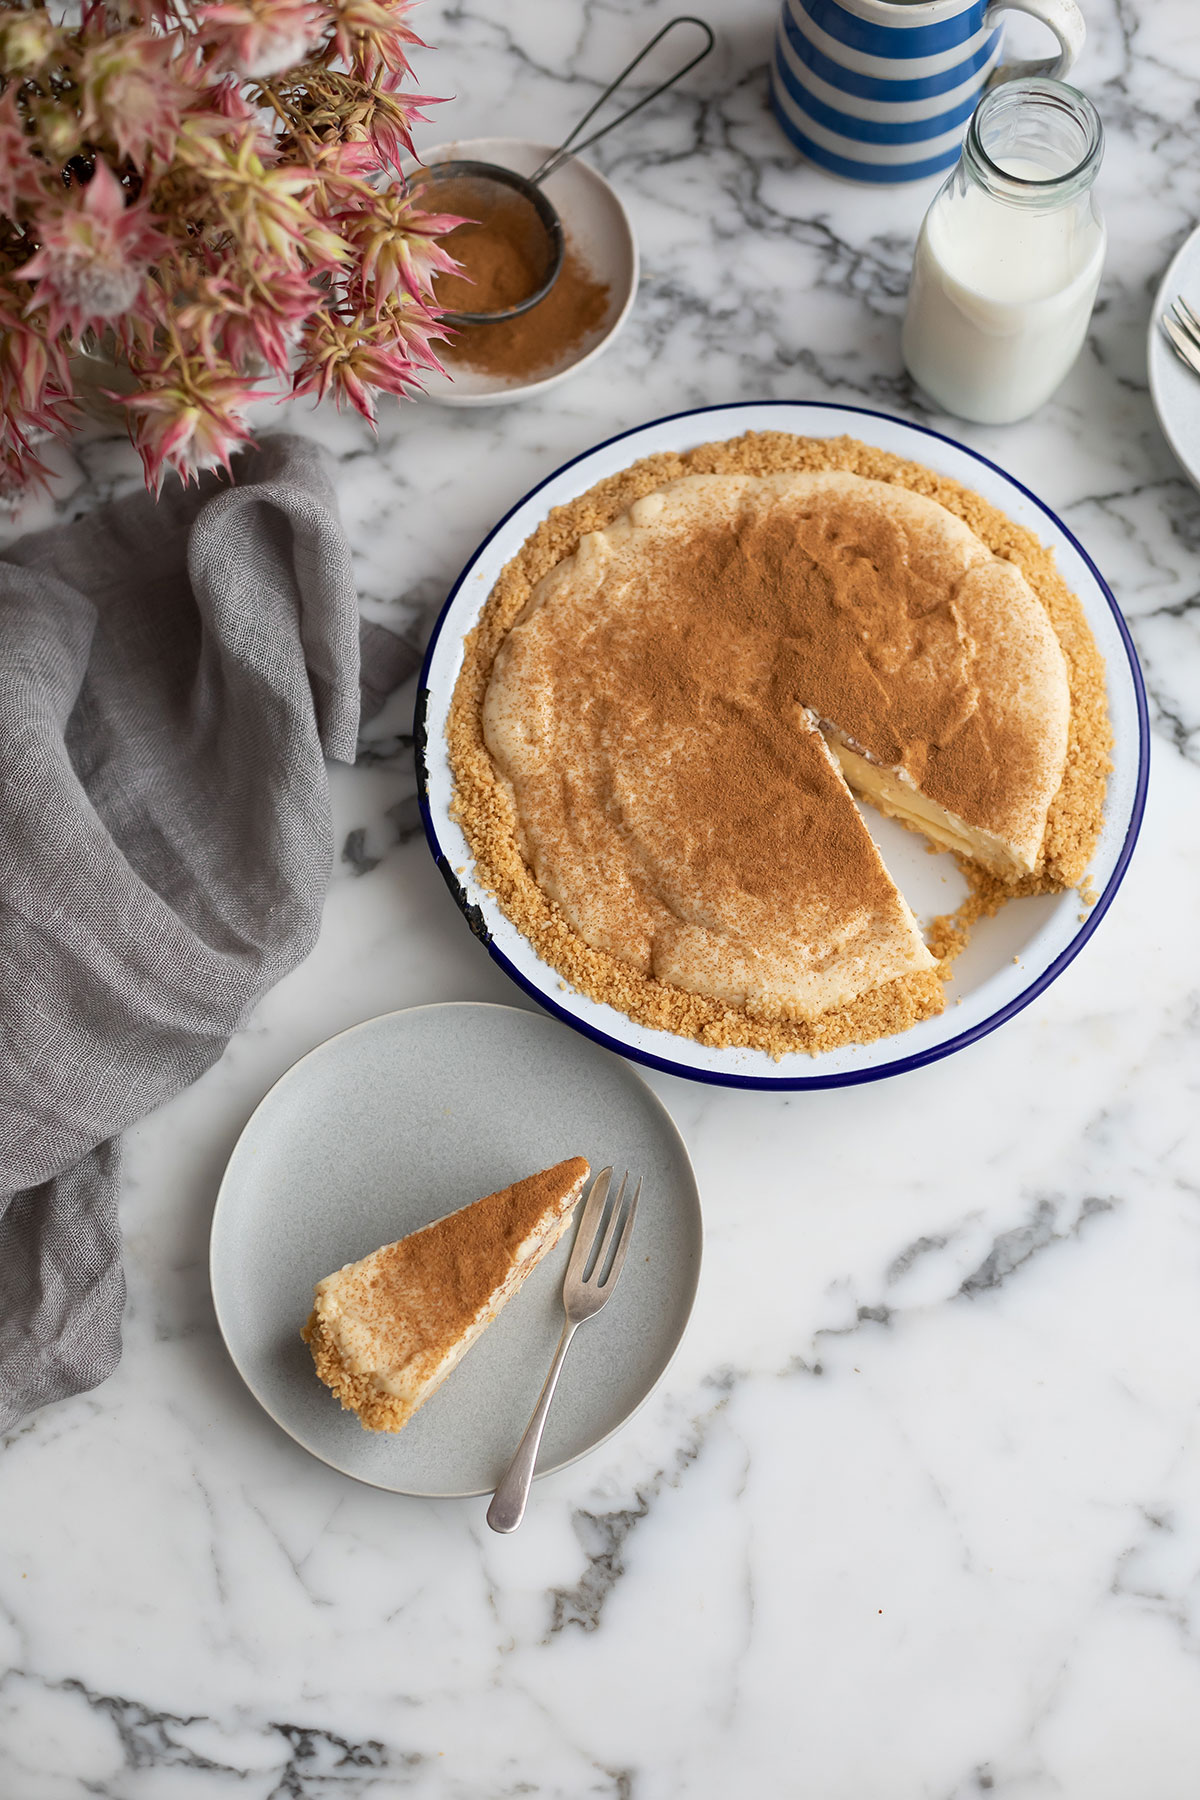 The best classic South African unbaked milk tart recipe with a Tennis biscuit base